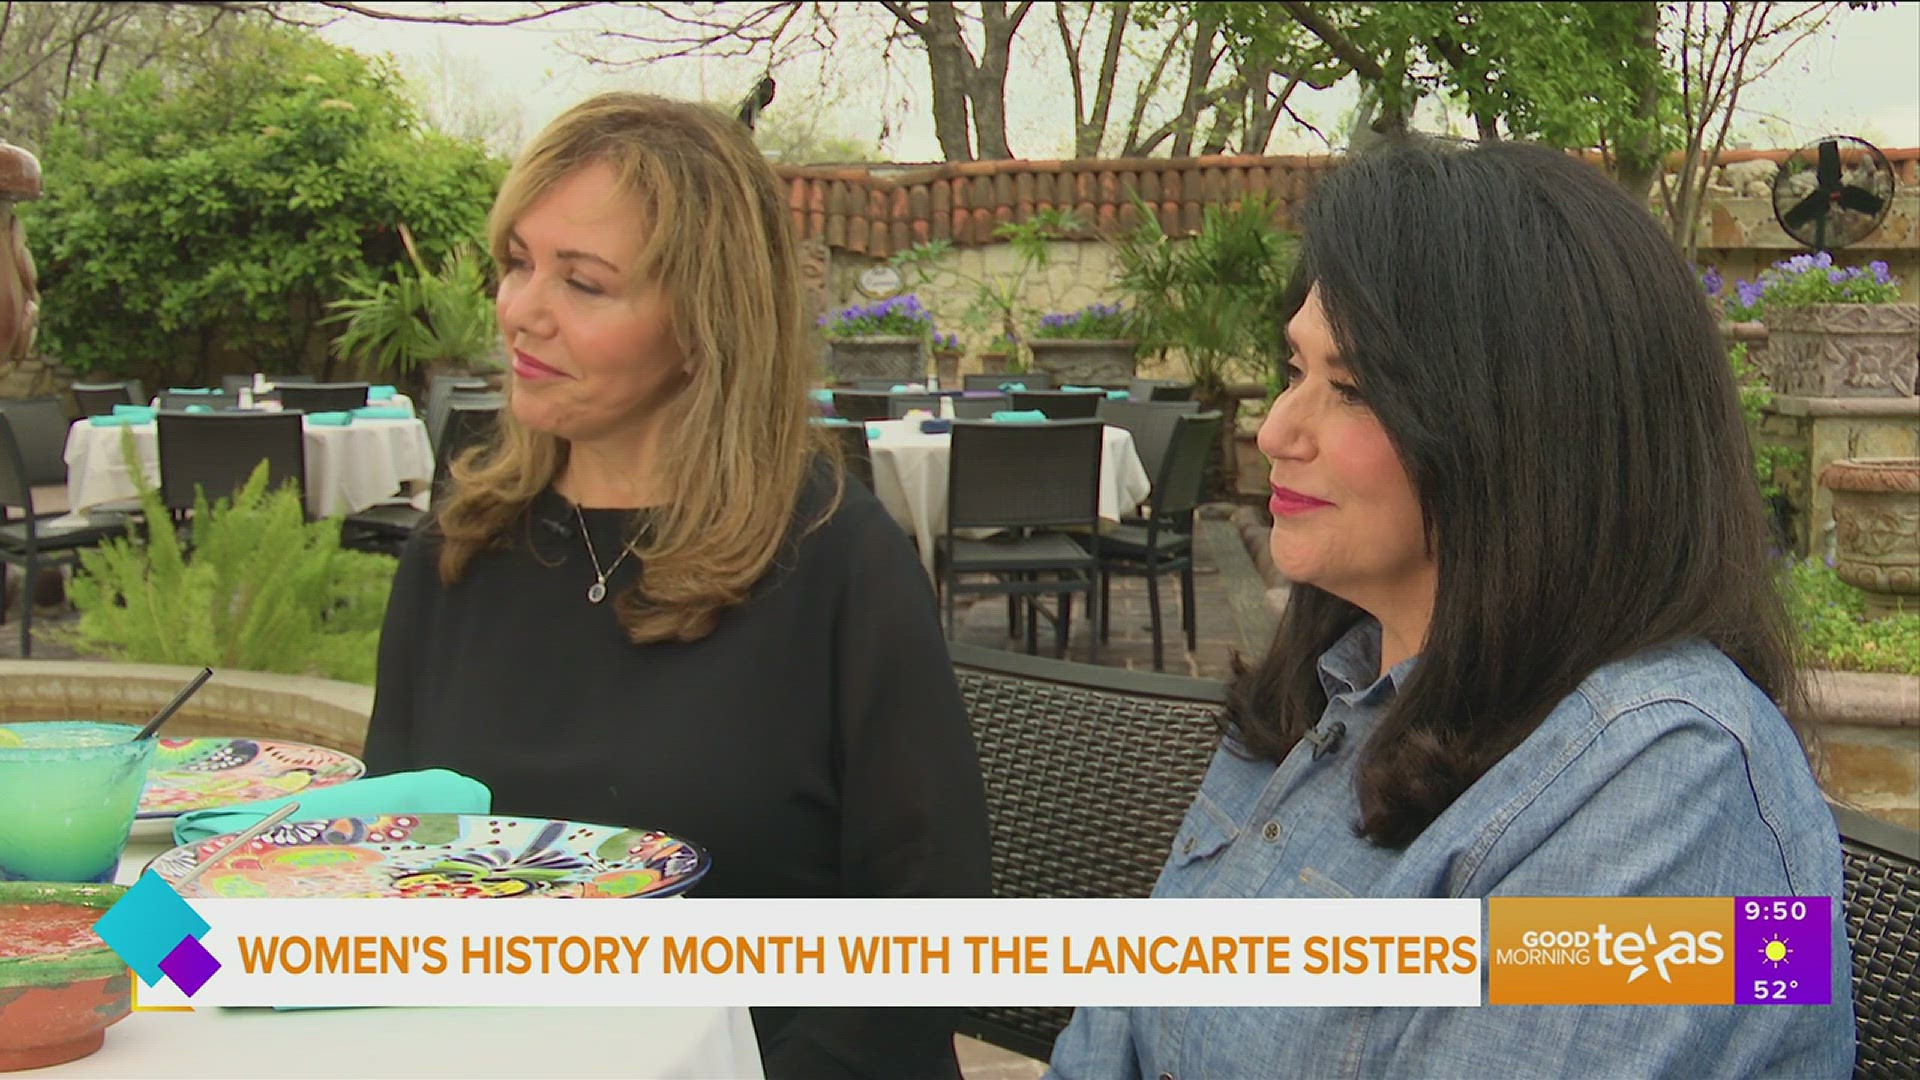 Paige sat down with the Lancarte sisters for Women's History Month.